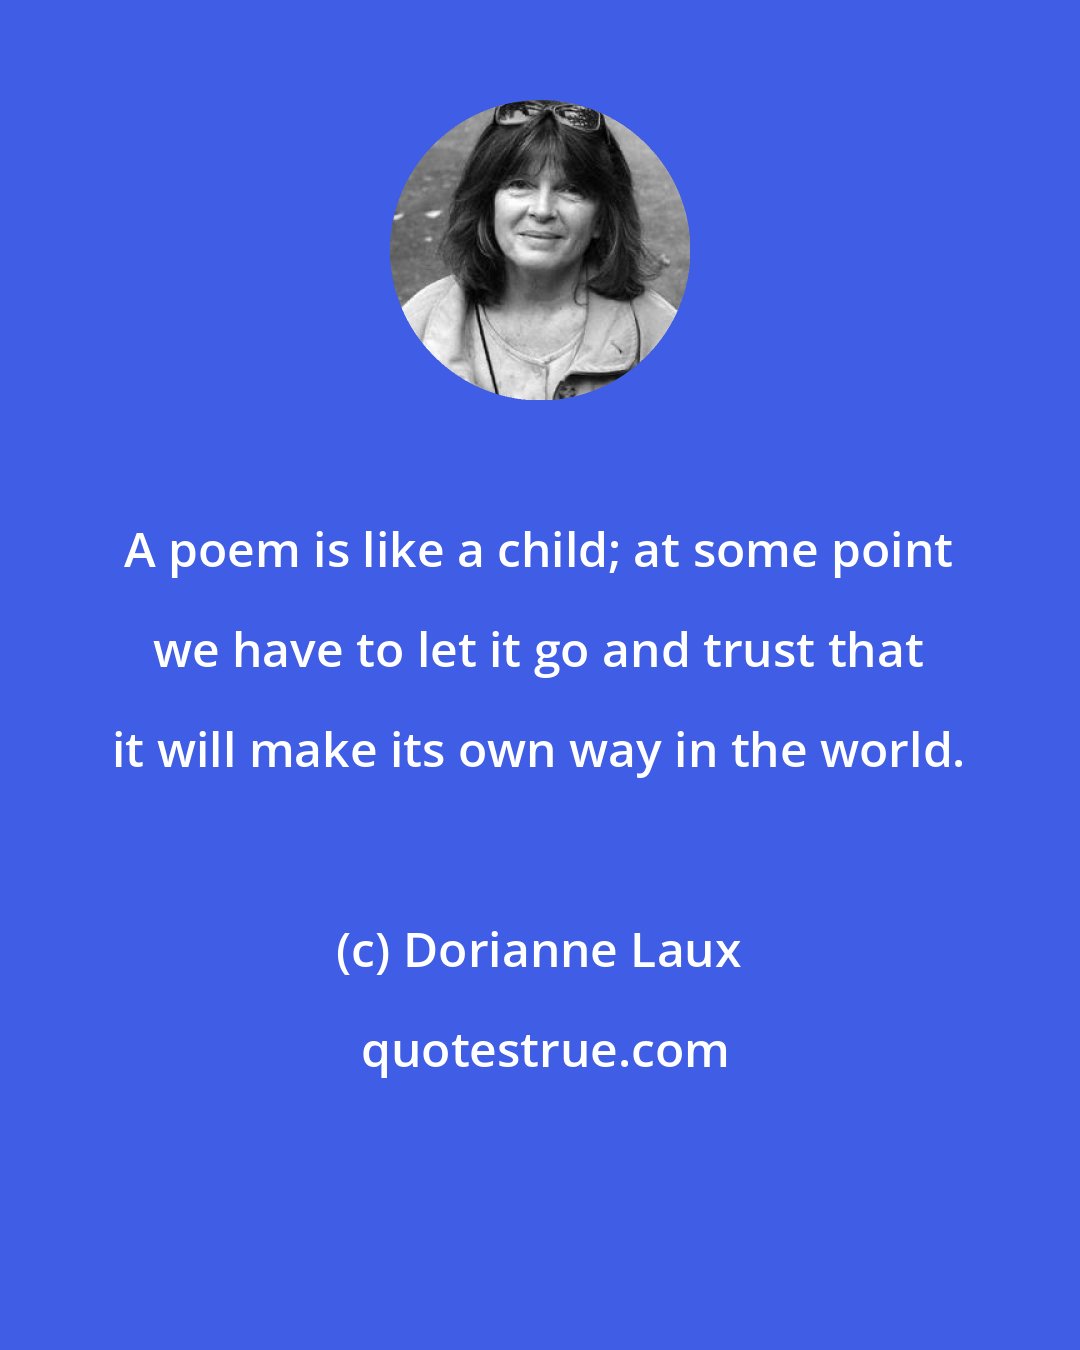 Dorianne Laux: A poem is like a child; at some point we have to let it go and trust that it will make its own way in the world.